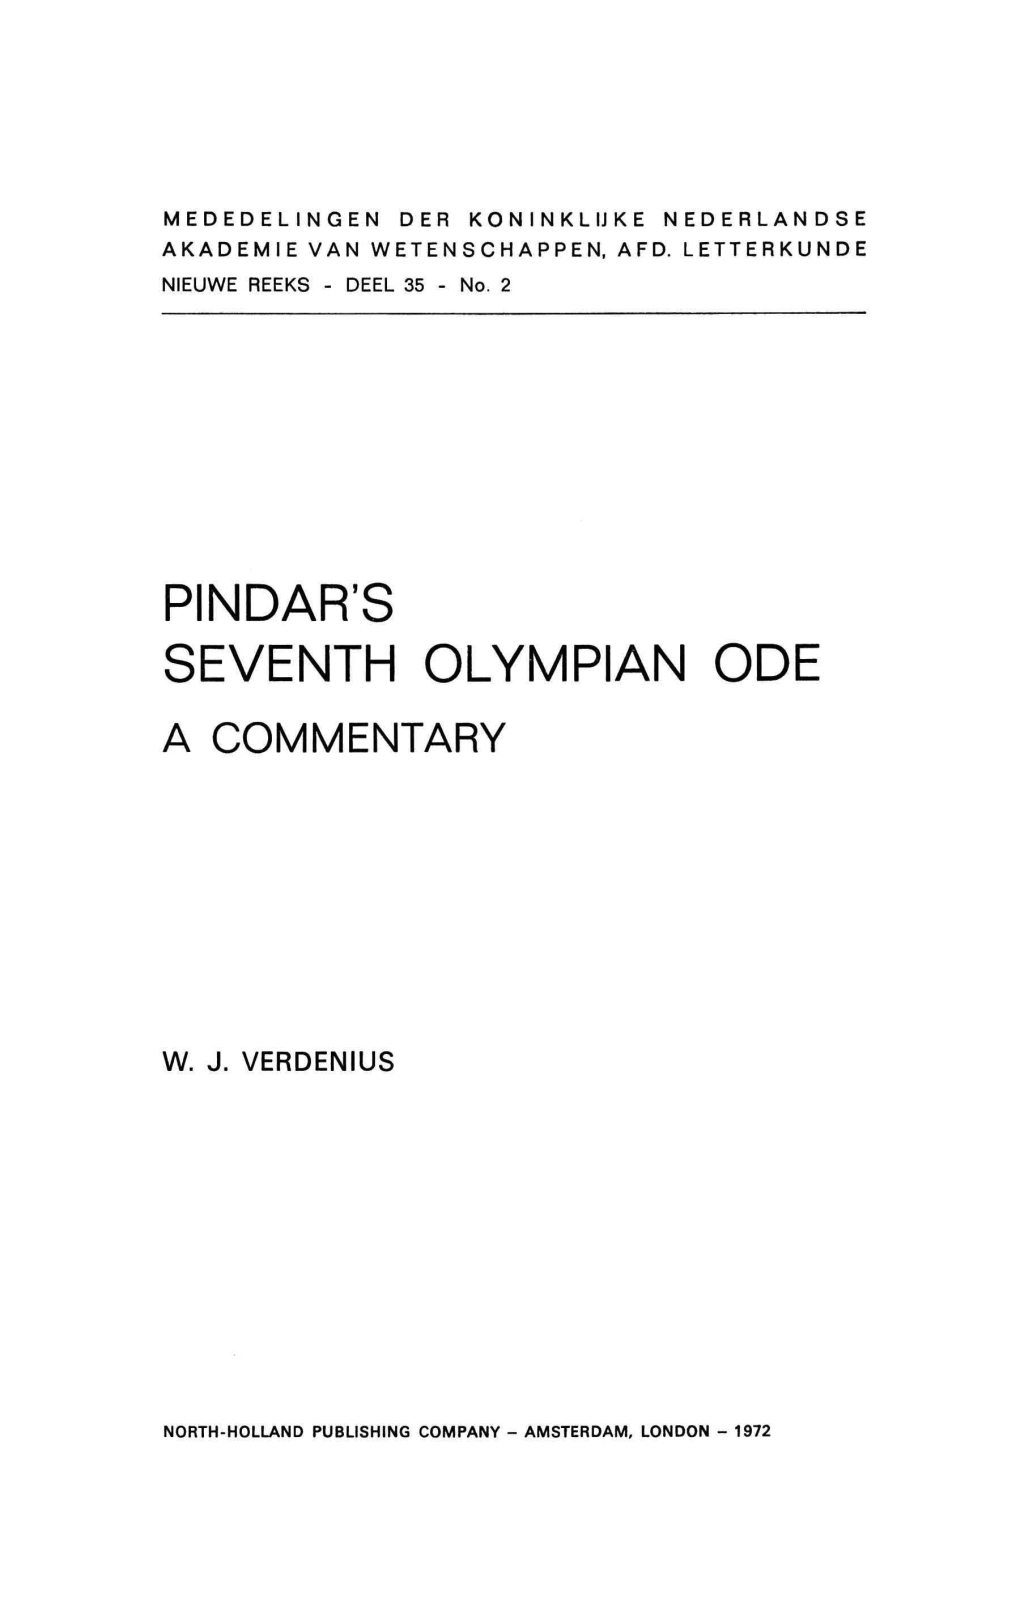 Pindar's Seventh Olympian Ode. a Commentary